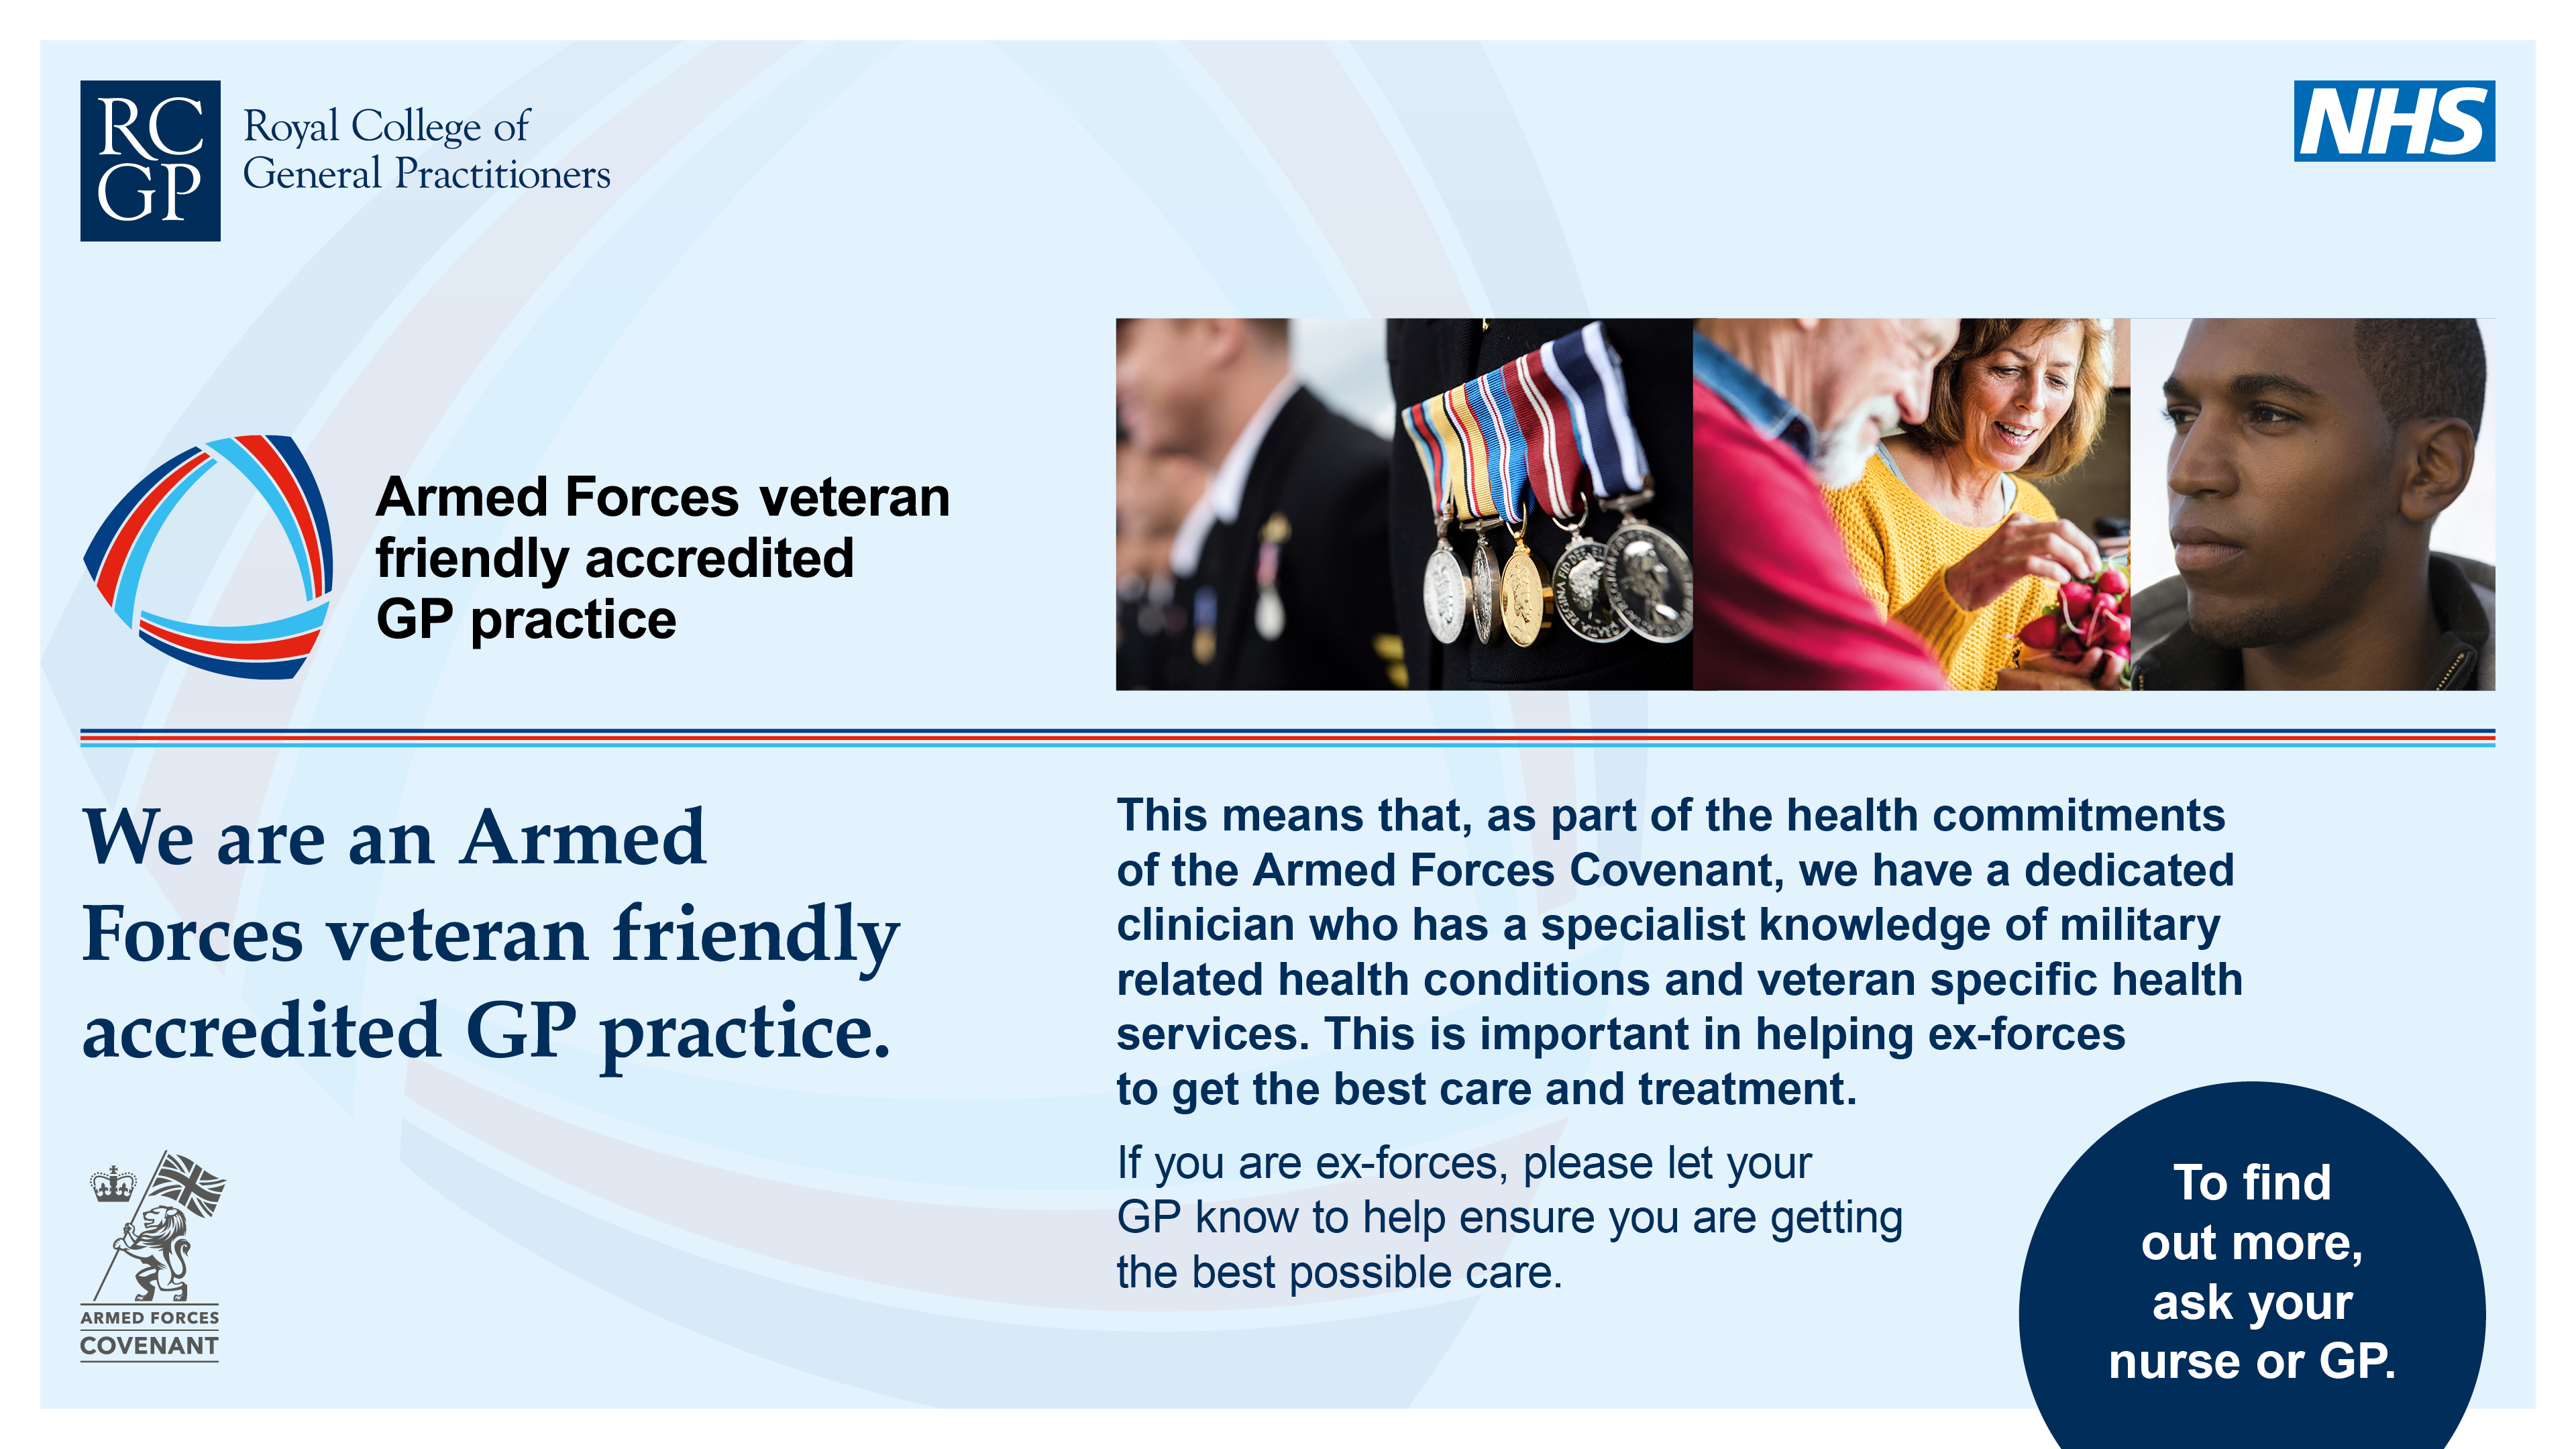 Accredited Veteran Friendly. Let us know if you are an armed forces veteran.